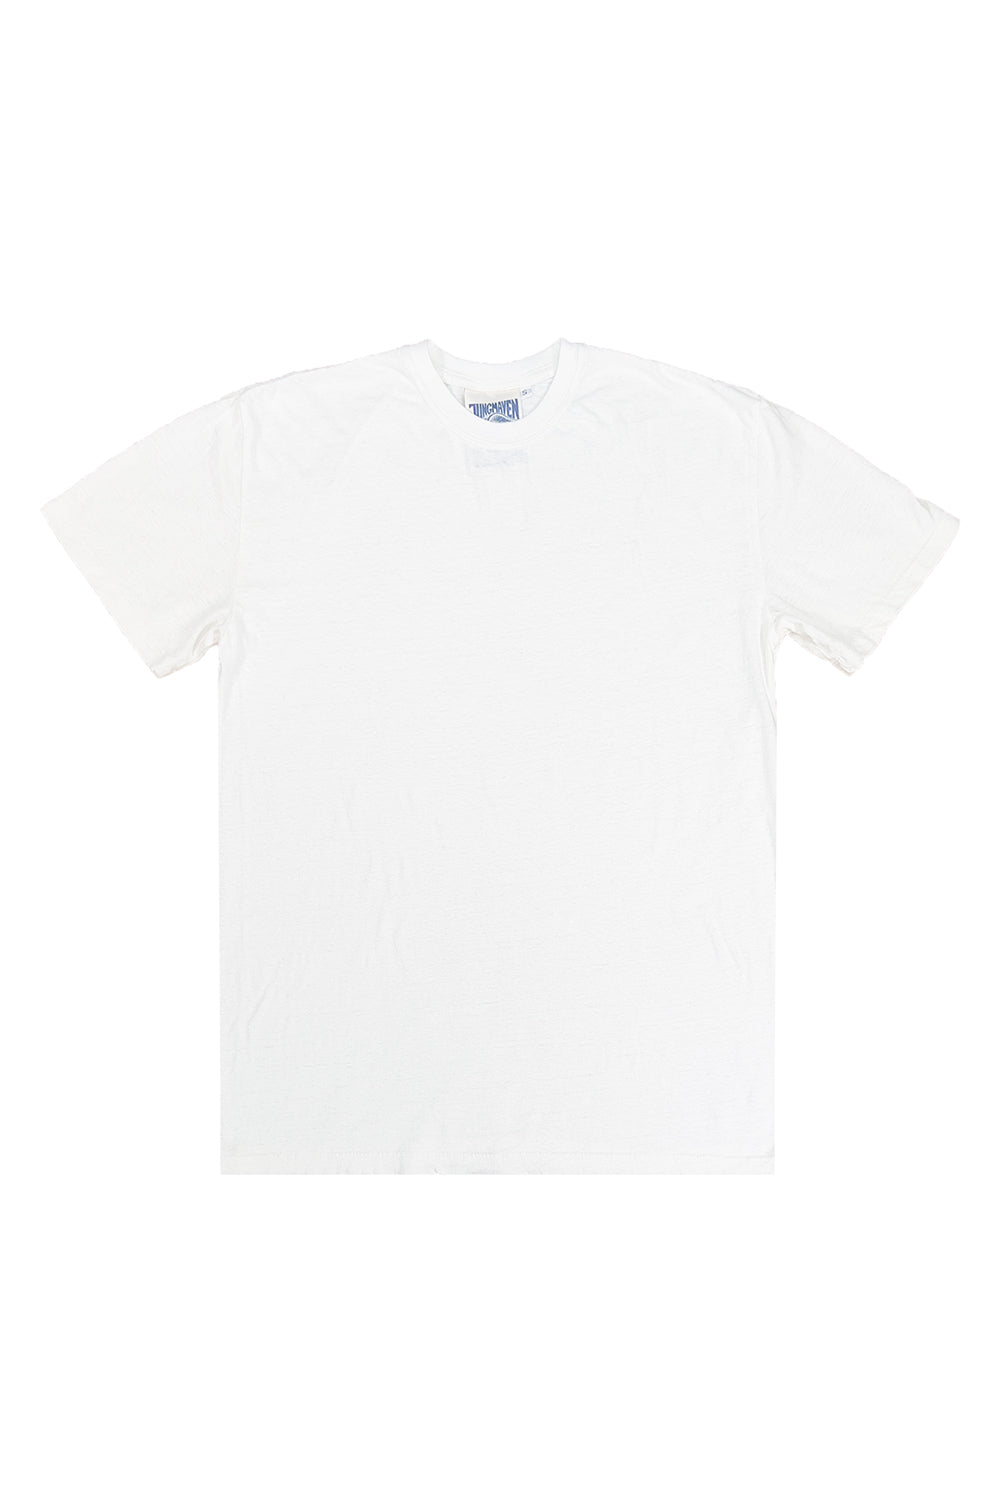 Original Tee | Jungmaven Hemp Clothing & Accessories / Color: Washed White